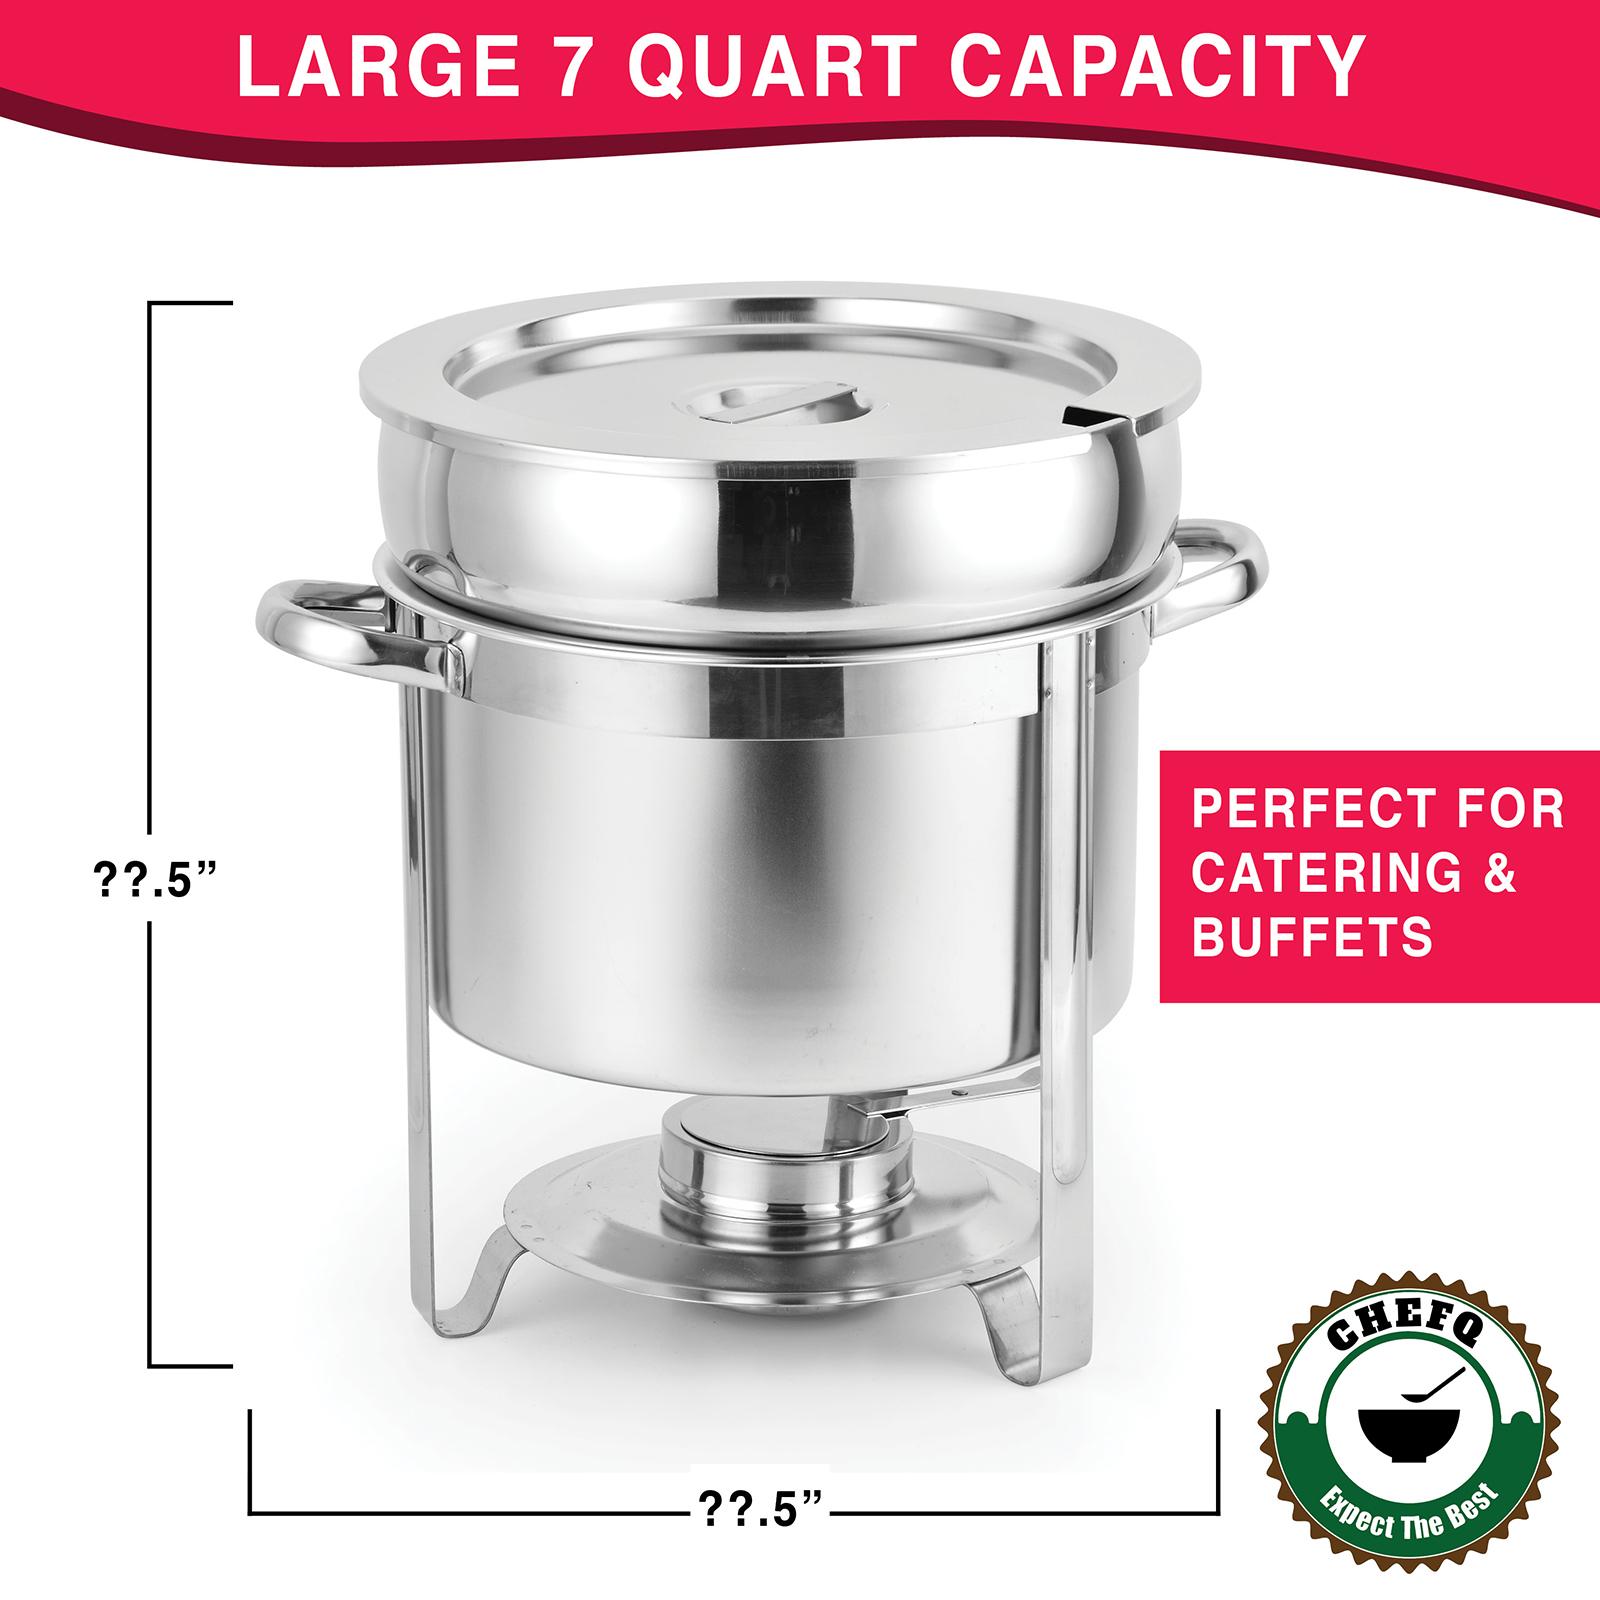 Soup Chafer Marmite Chafer Stainless Steel Buffet Set Warmer for Any Event or Party 7 Quart 2-PACK